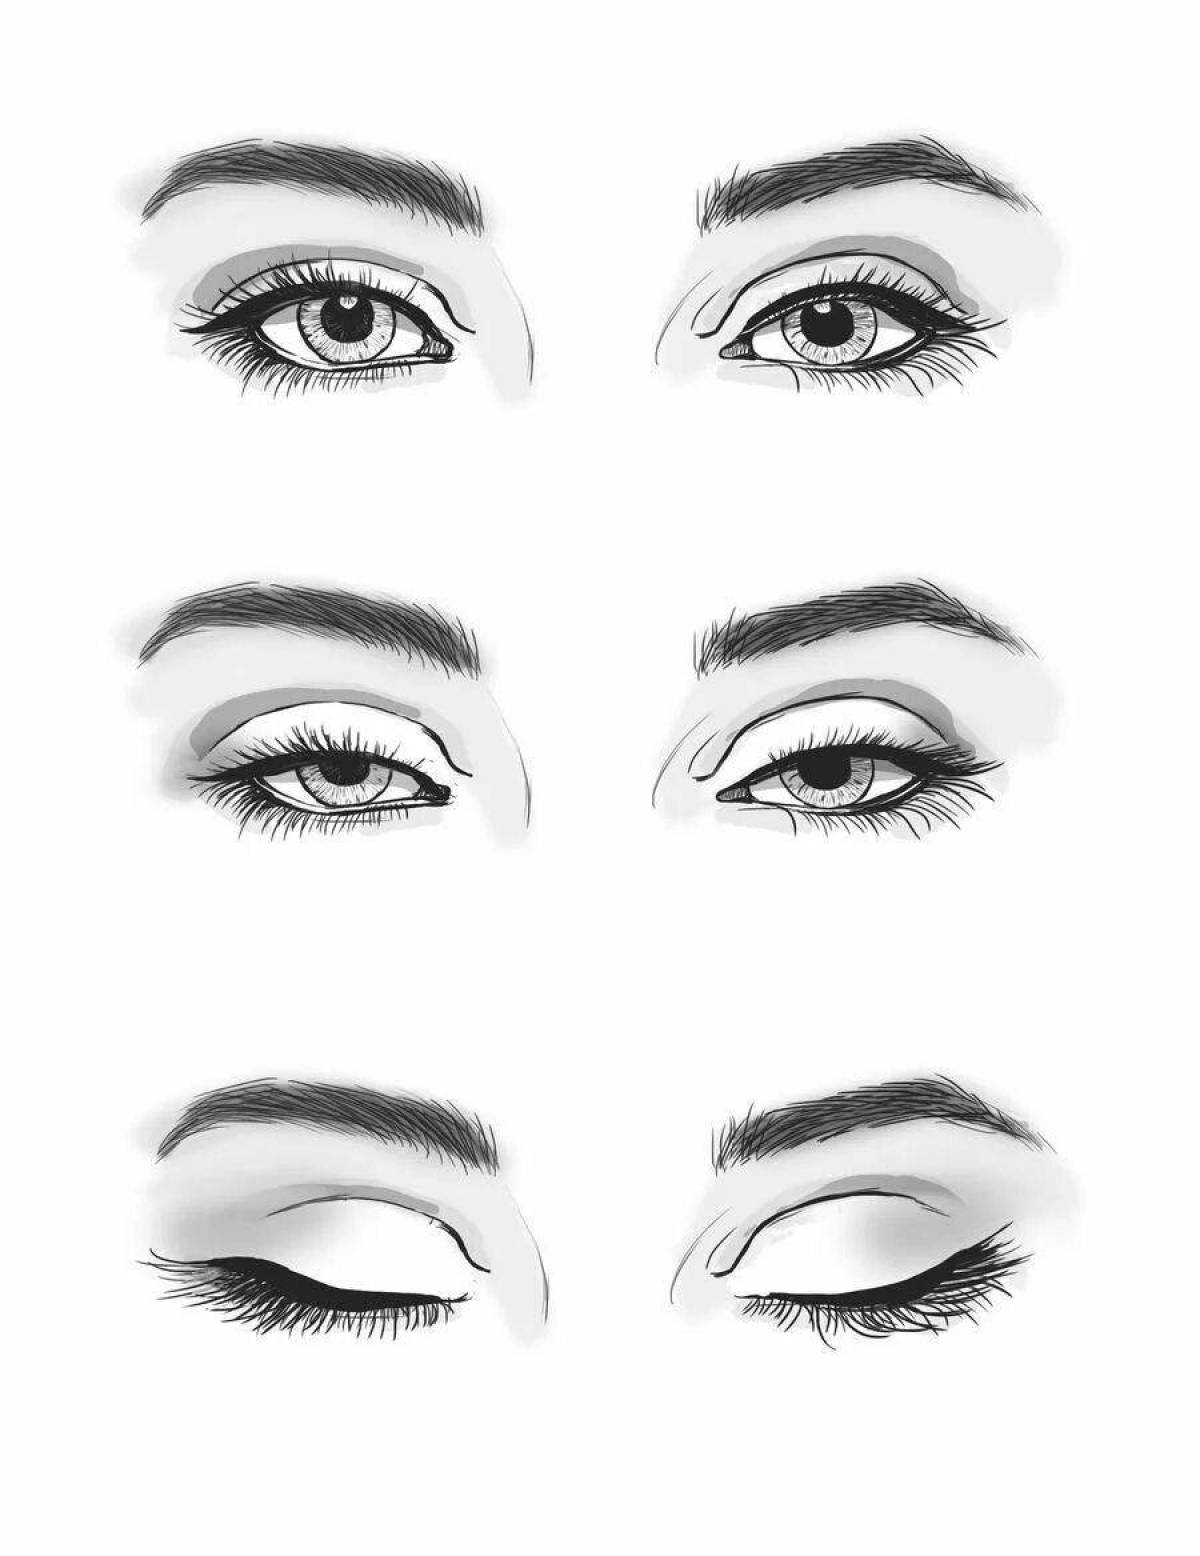 Intricate eye coloring for makeup